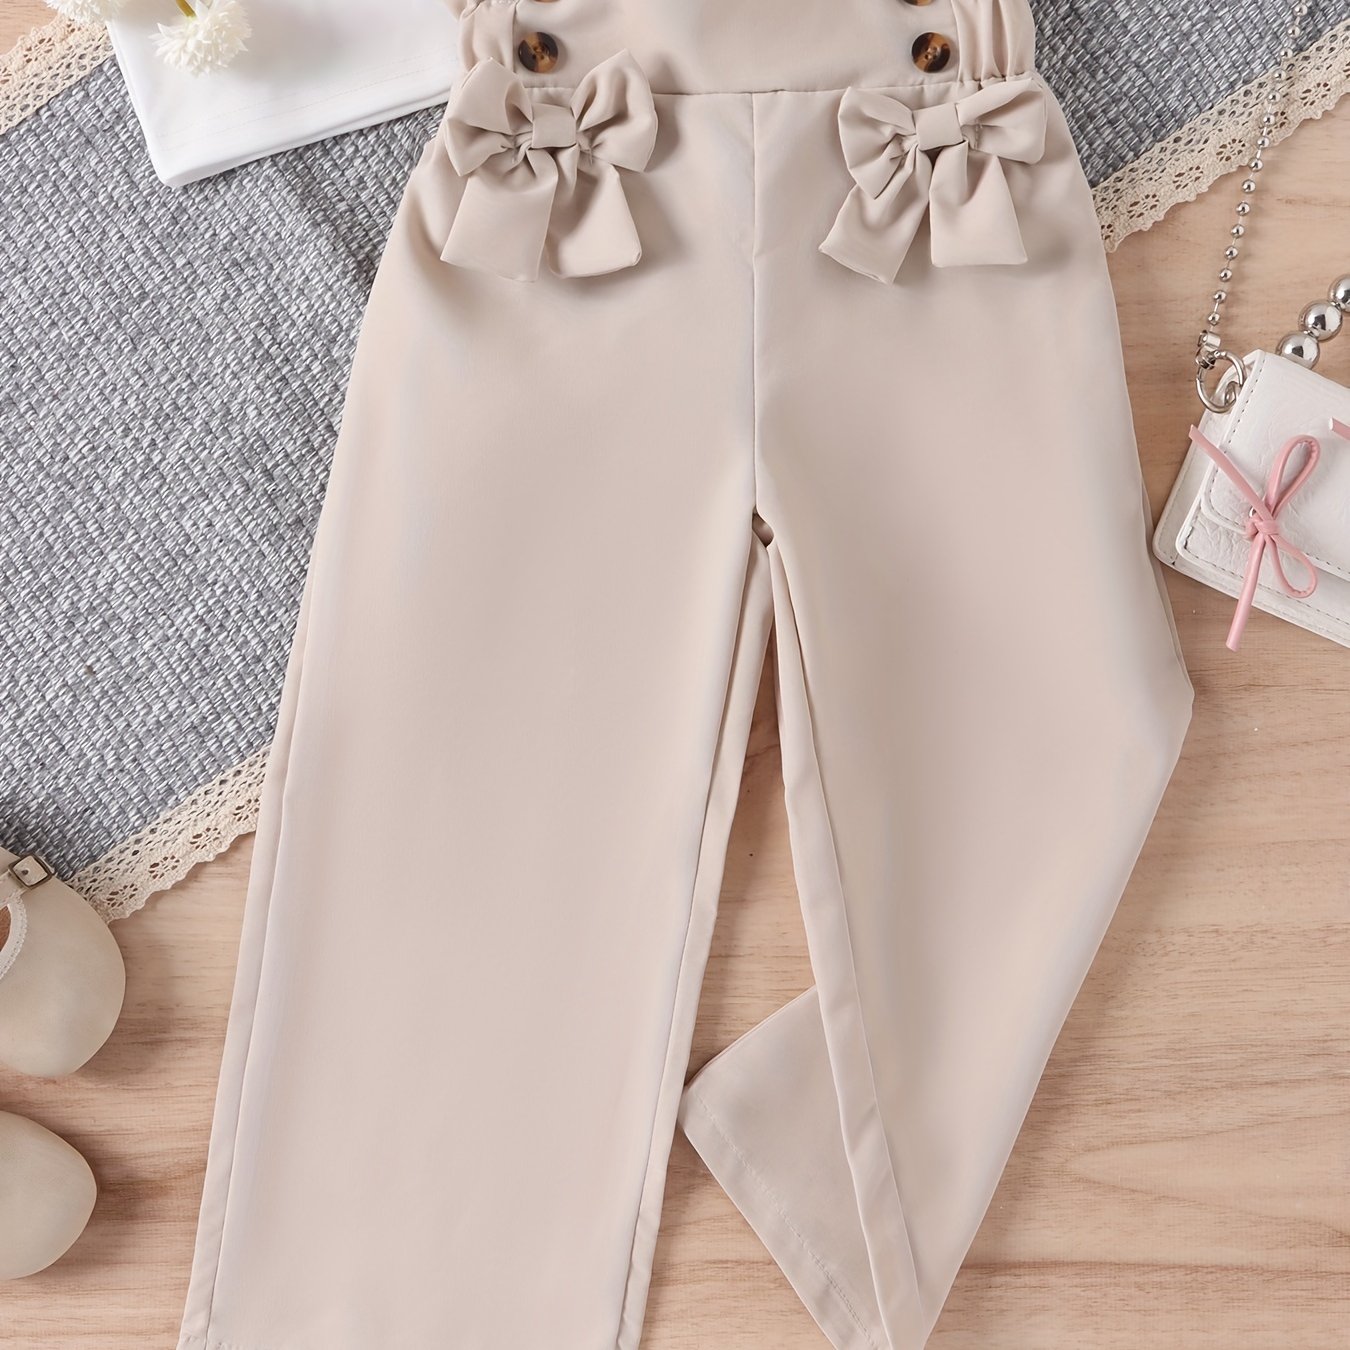 Little Girls' Cute Bow Front Straight Leg Casual Pants Kids, 40% OFF